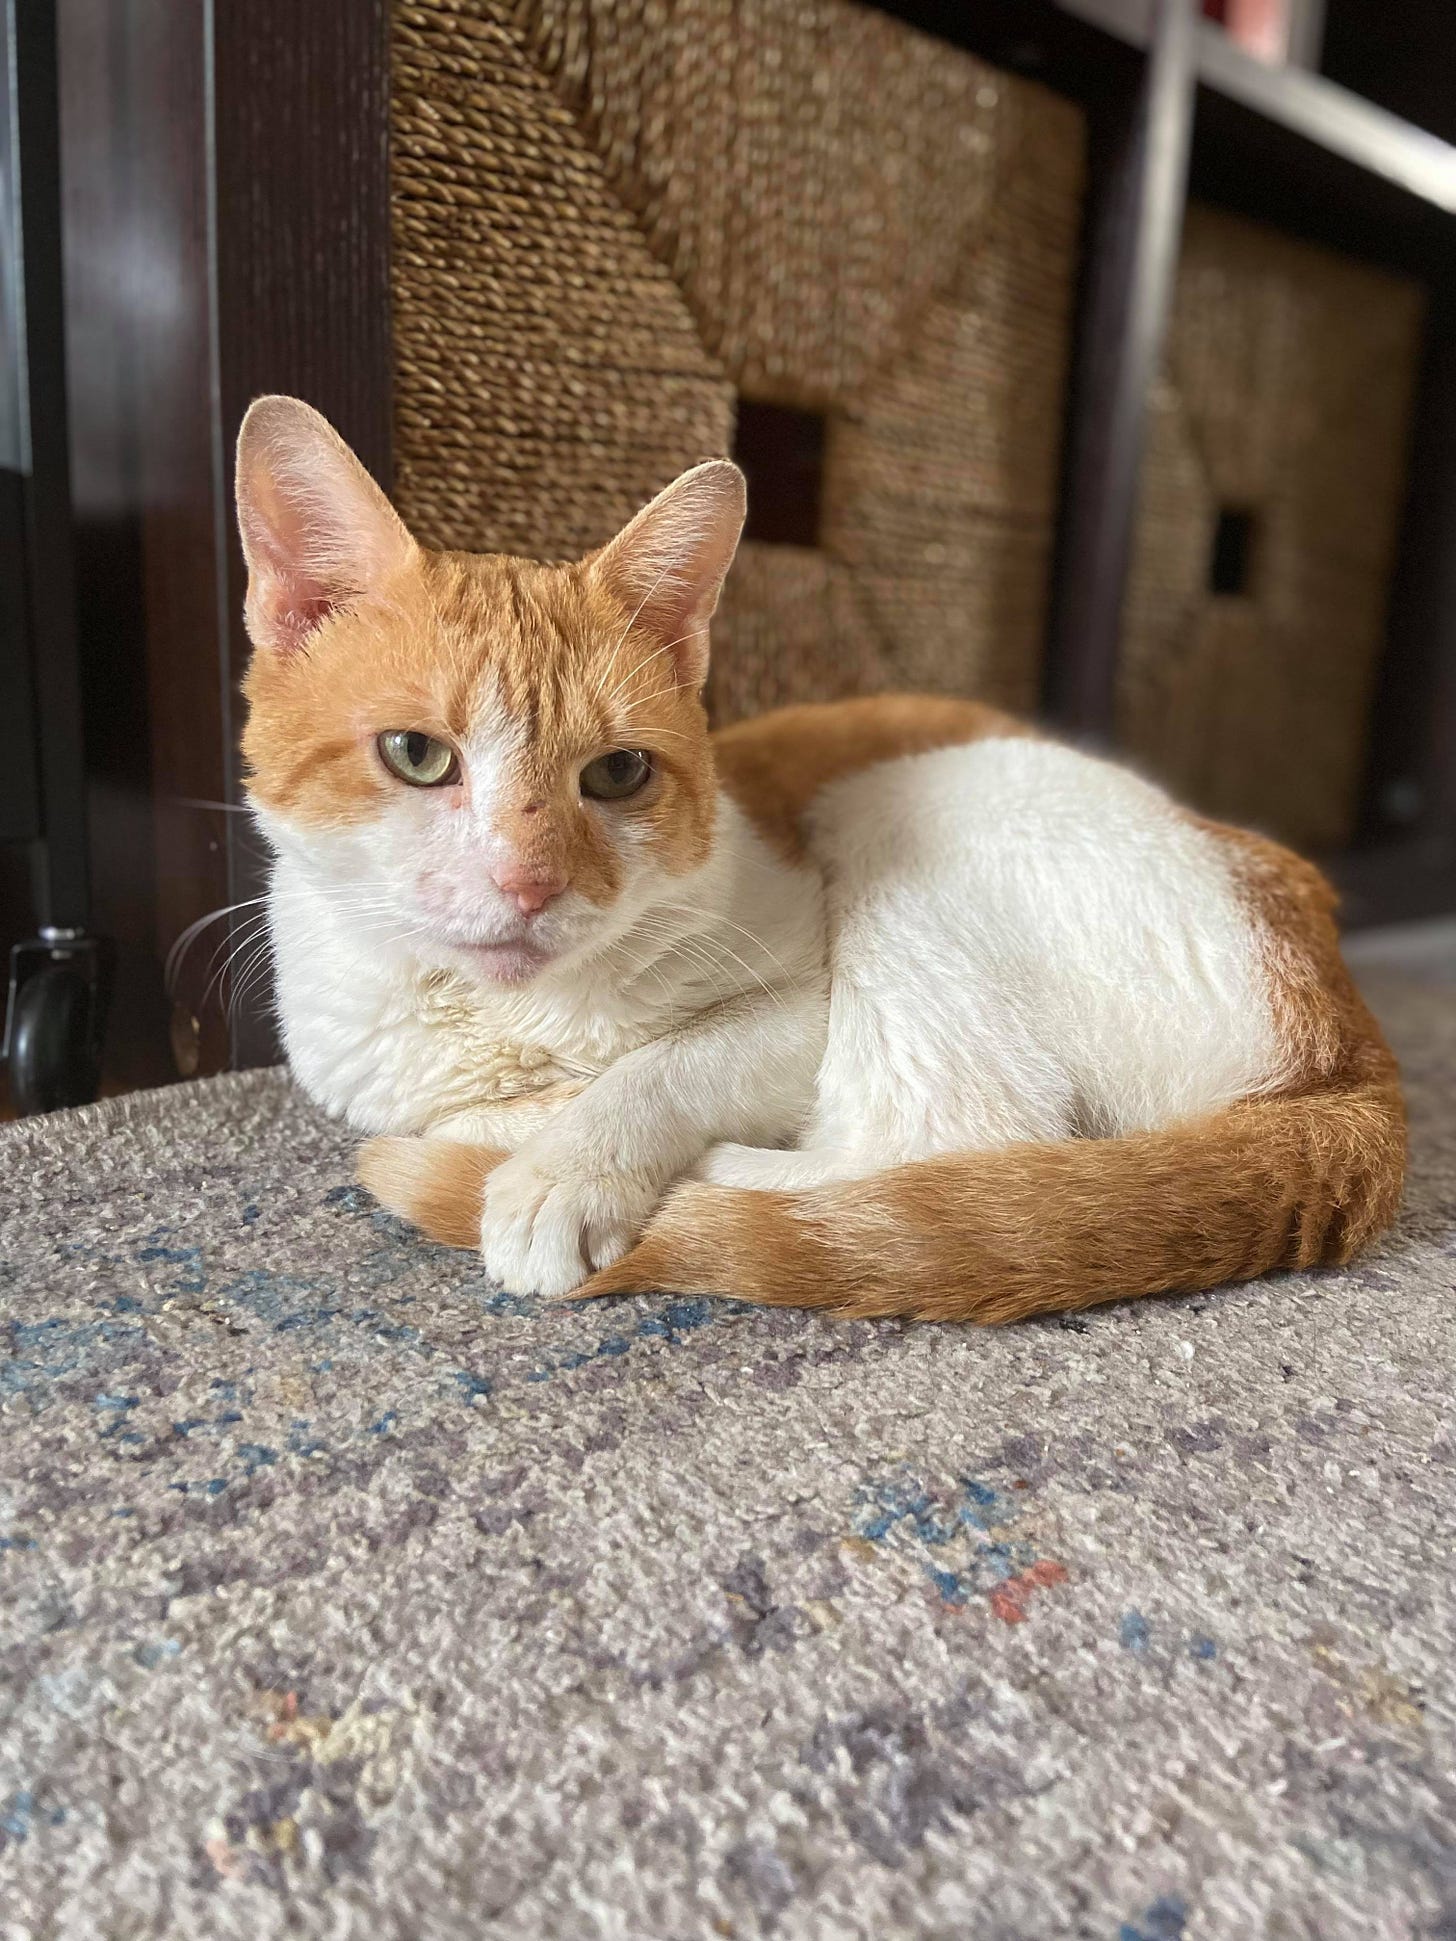 A red and white cat curled up on the floor, looking at the camera